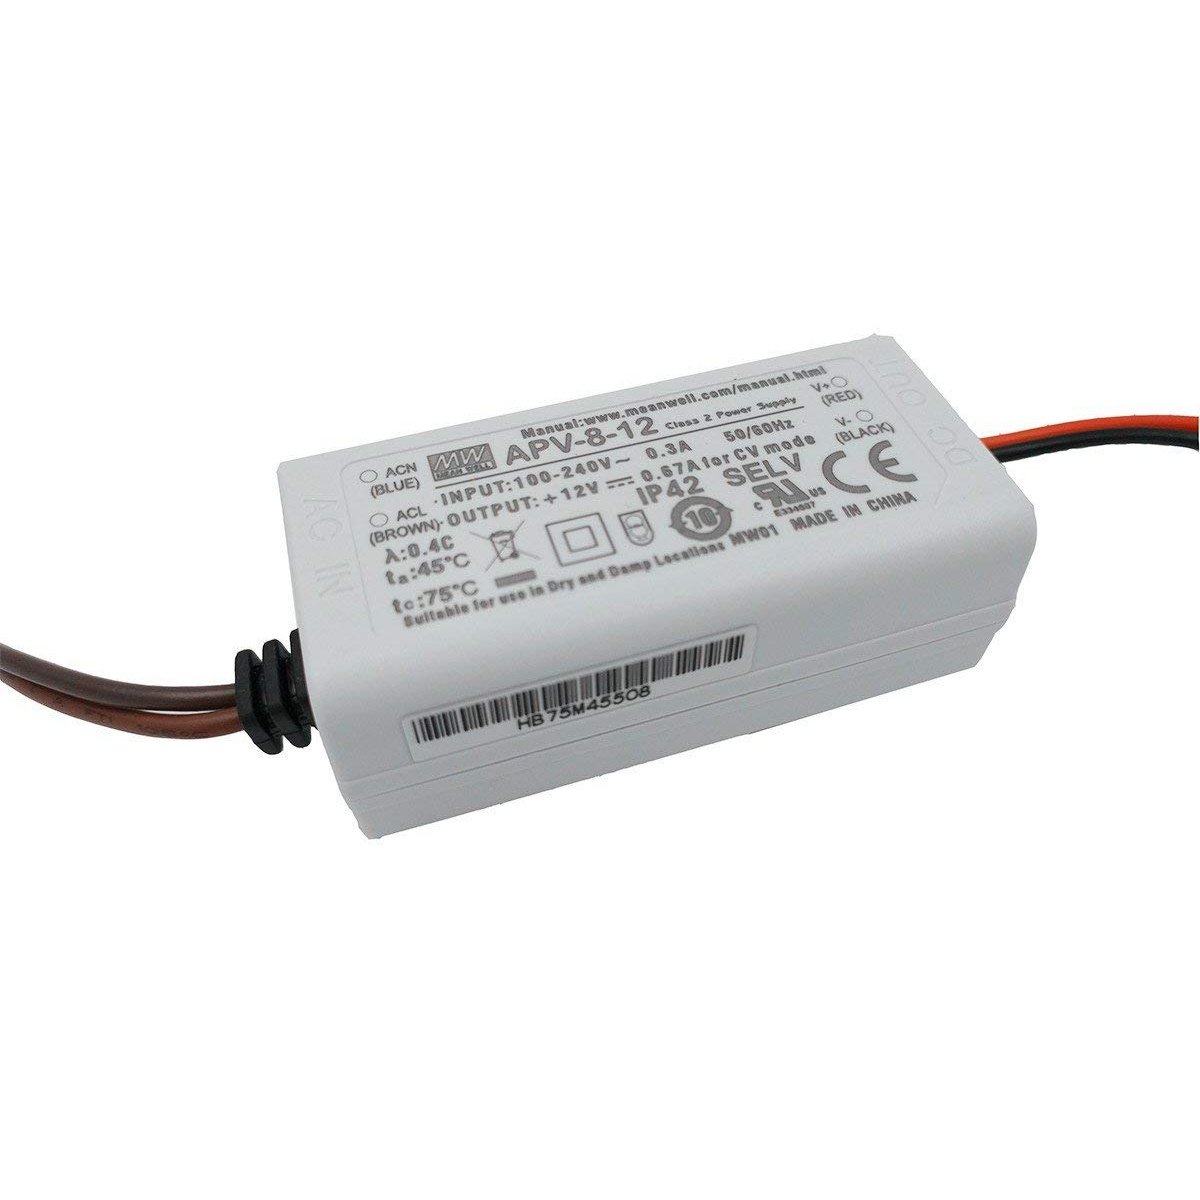 Meanwell APV-8-12 8W 12V DC LED Driver | Reliable Power Supply for LED Illumination voltkart